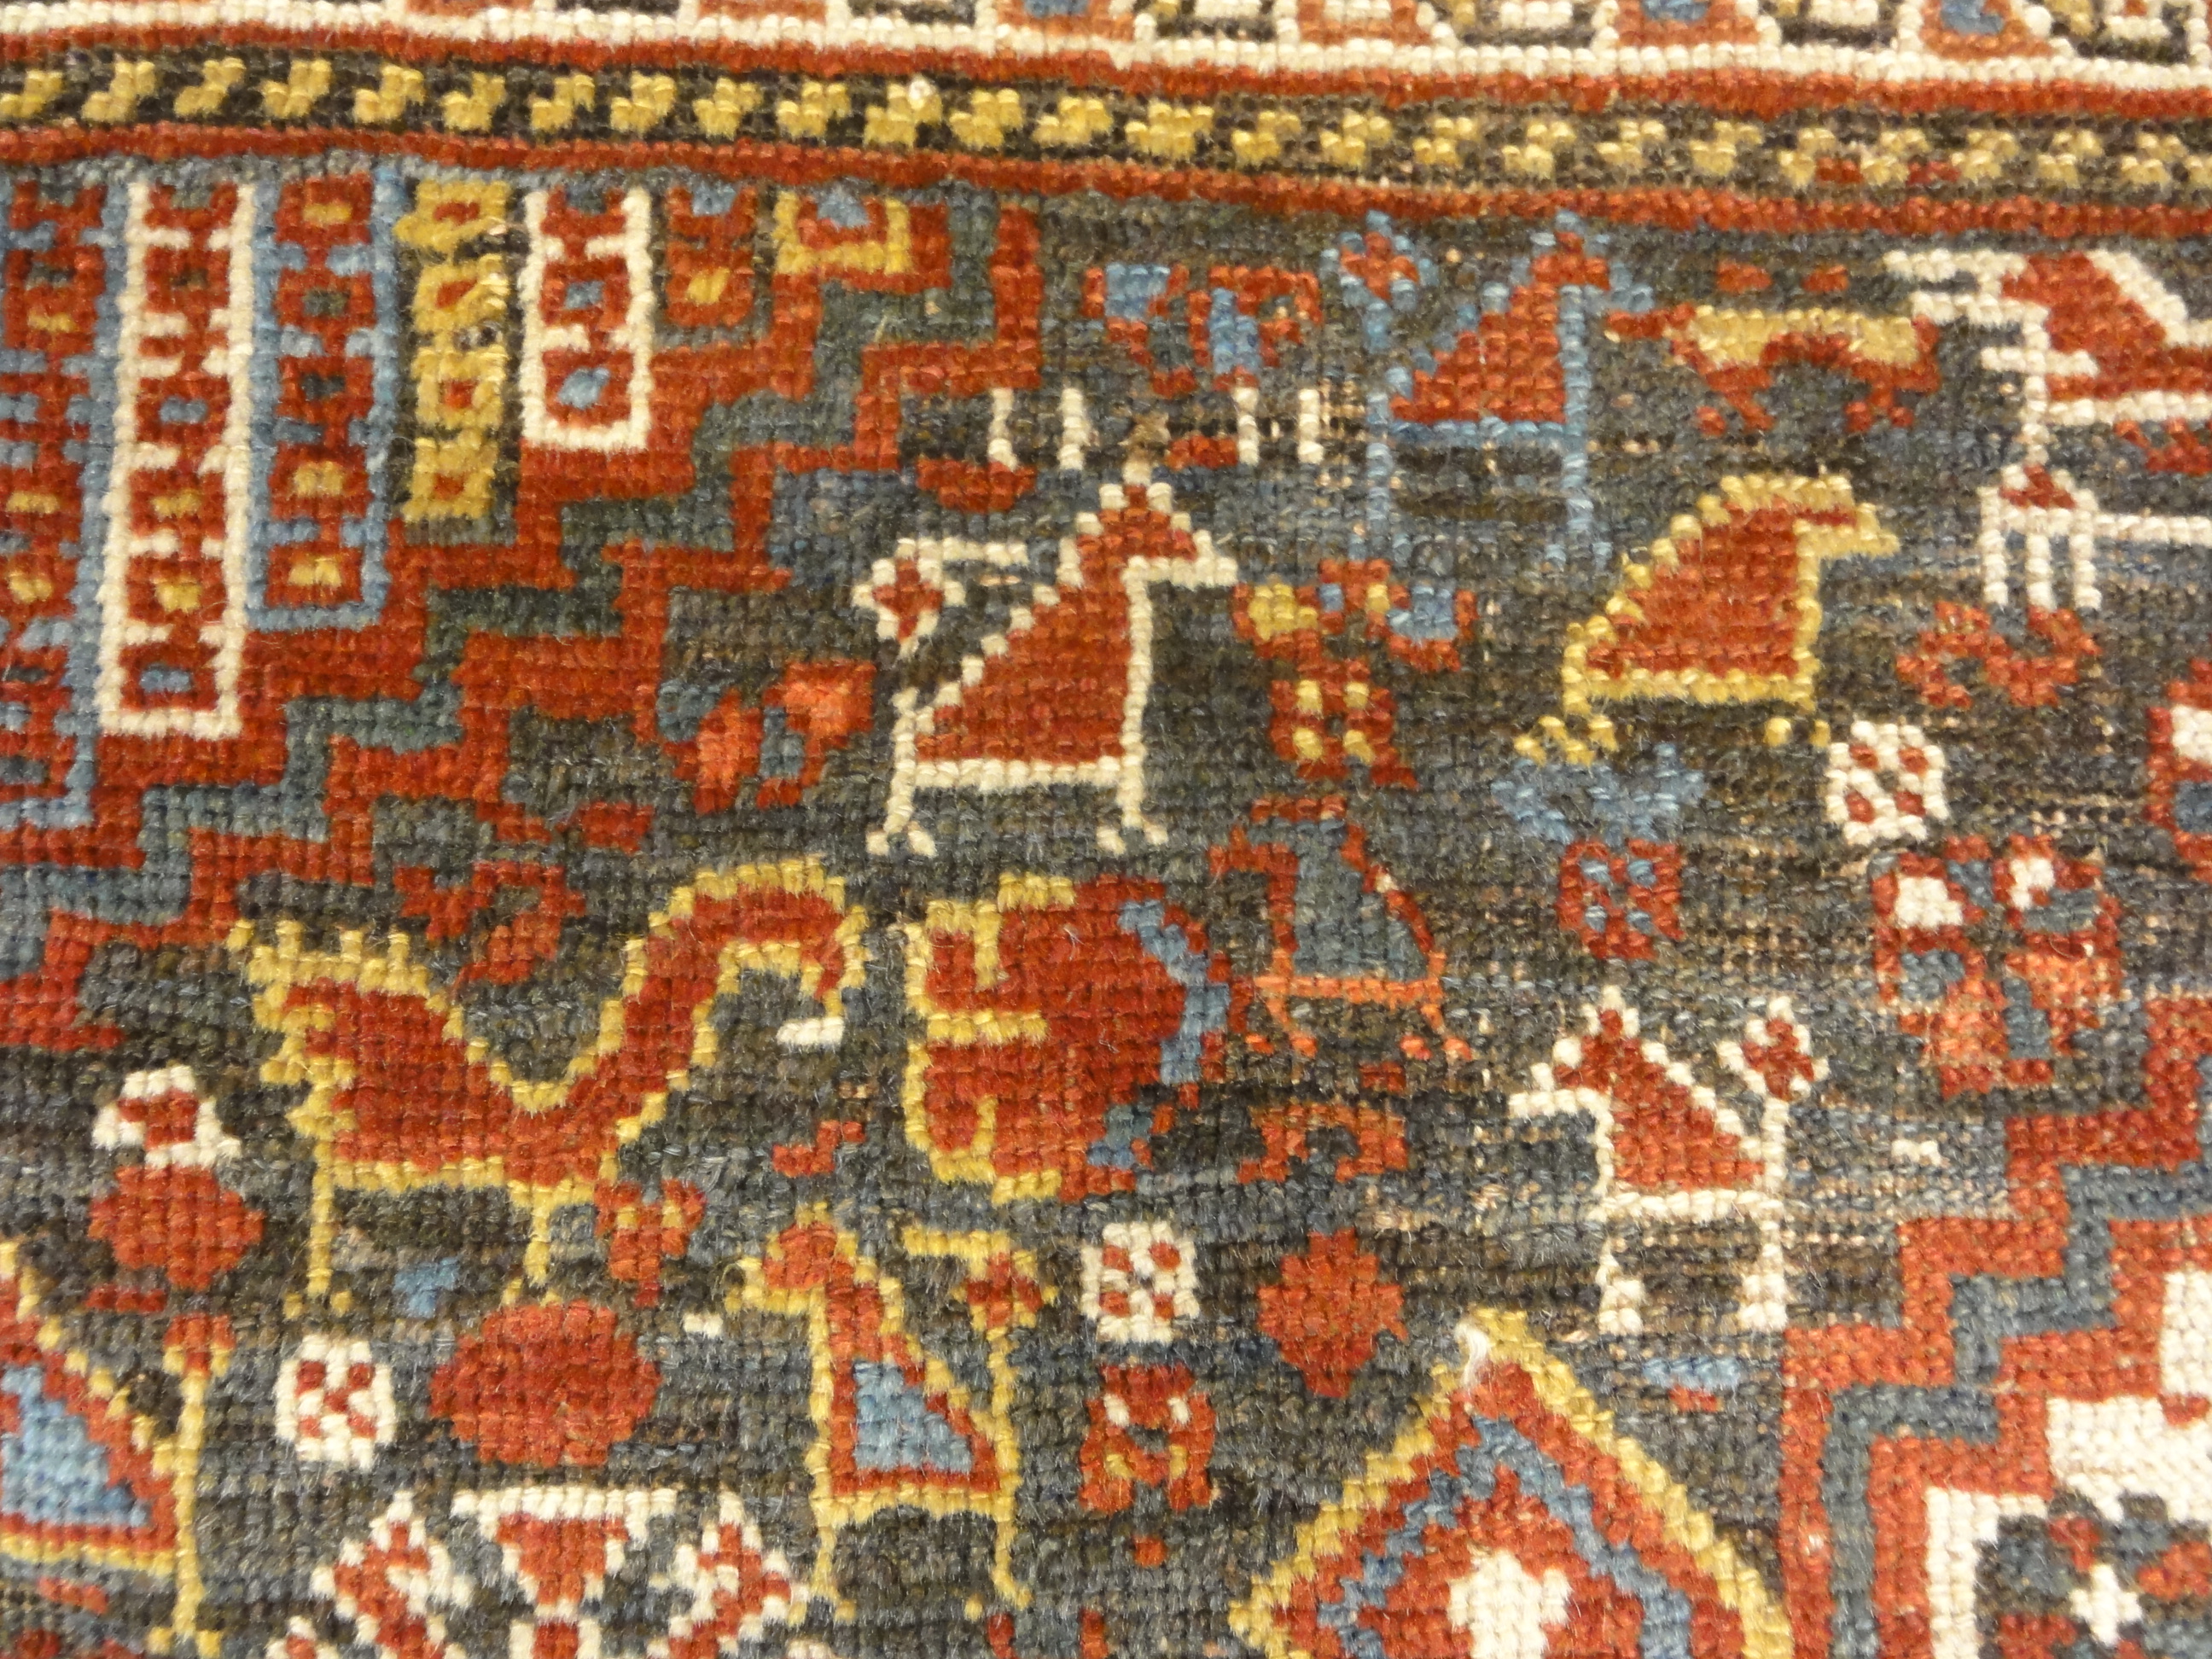 Antique Persian Khamseh Chicken Rug. A piece of genuine woven carpet art sold by Santa Barbara Design Center Rugs and More.